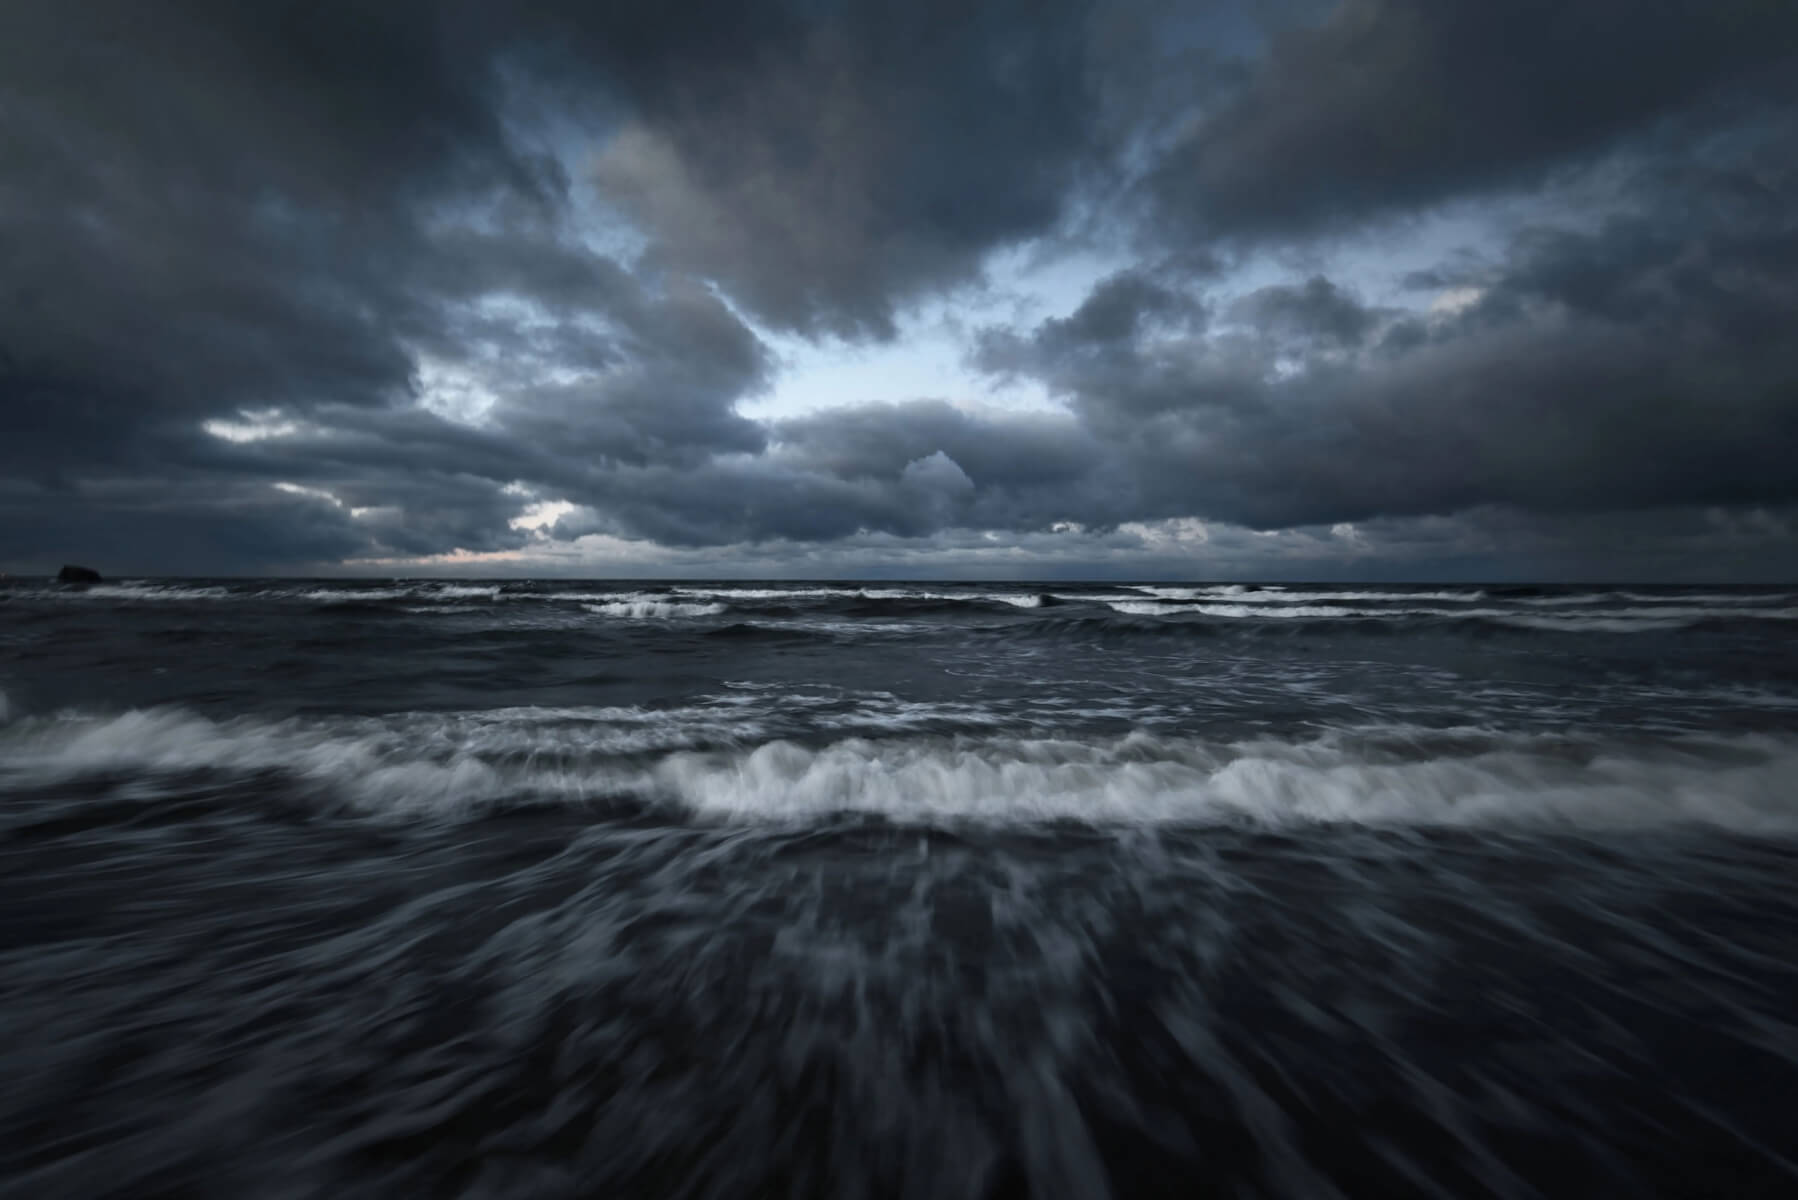 Storm clouds above the Baltic sea in winter, long exposure. Dramatic sky, waves and water splashes. Dark seascape. Germany